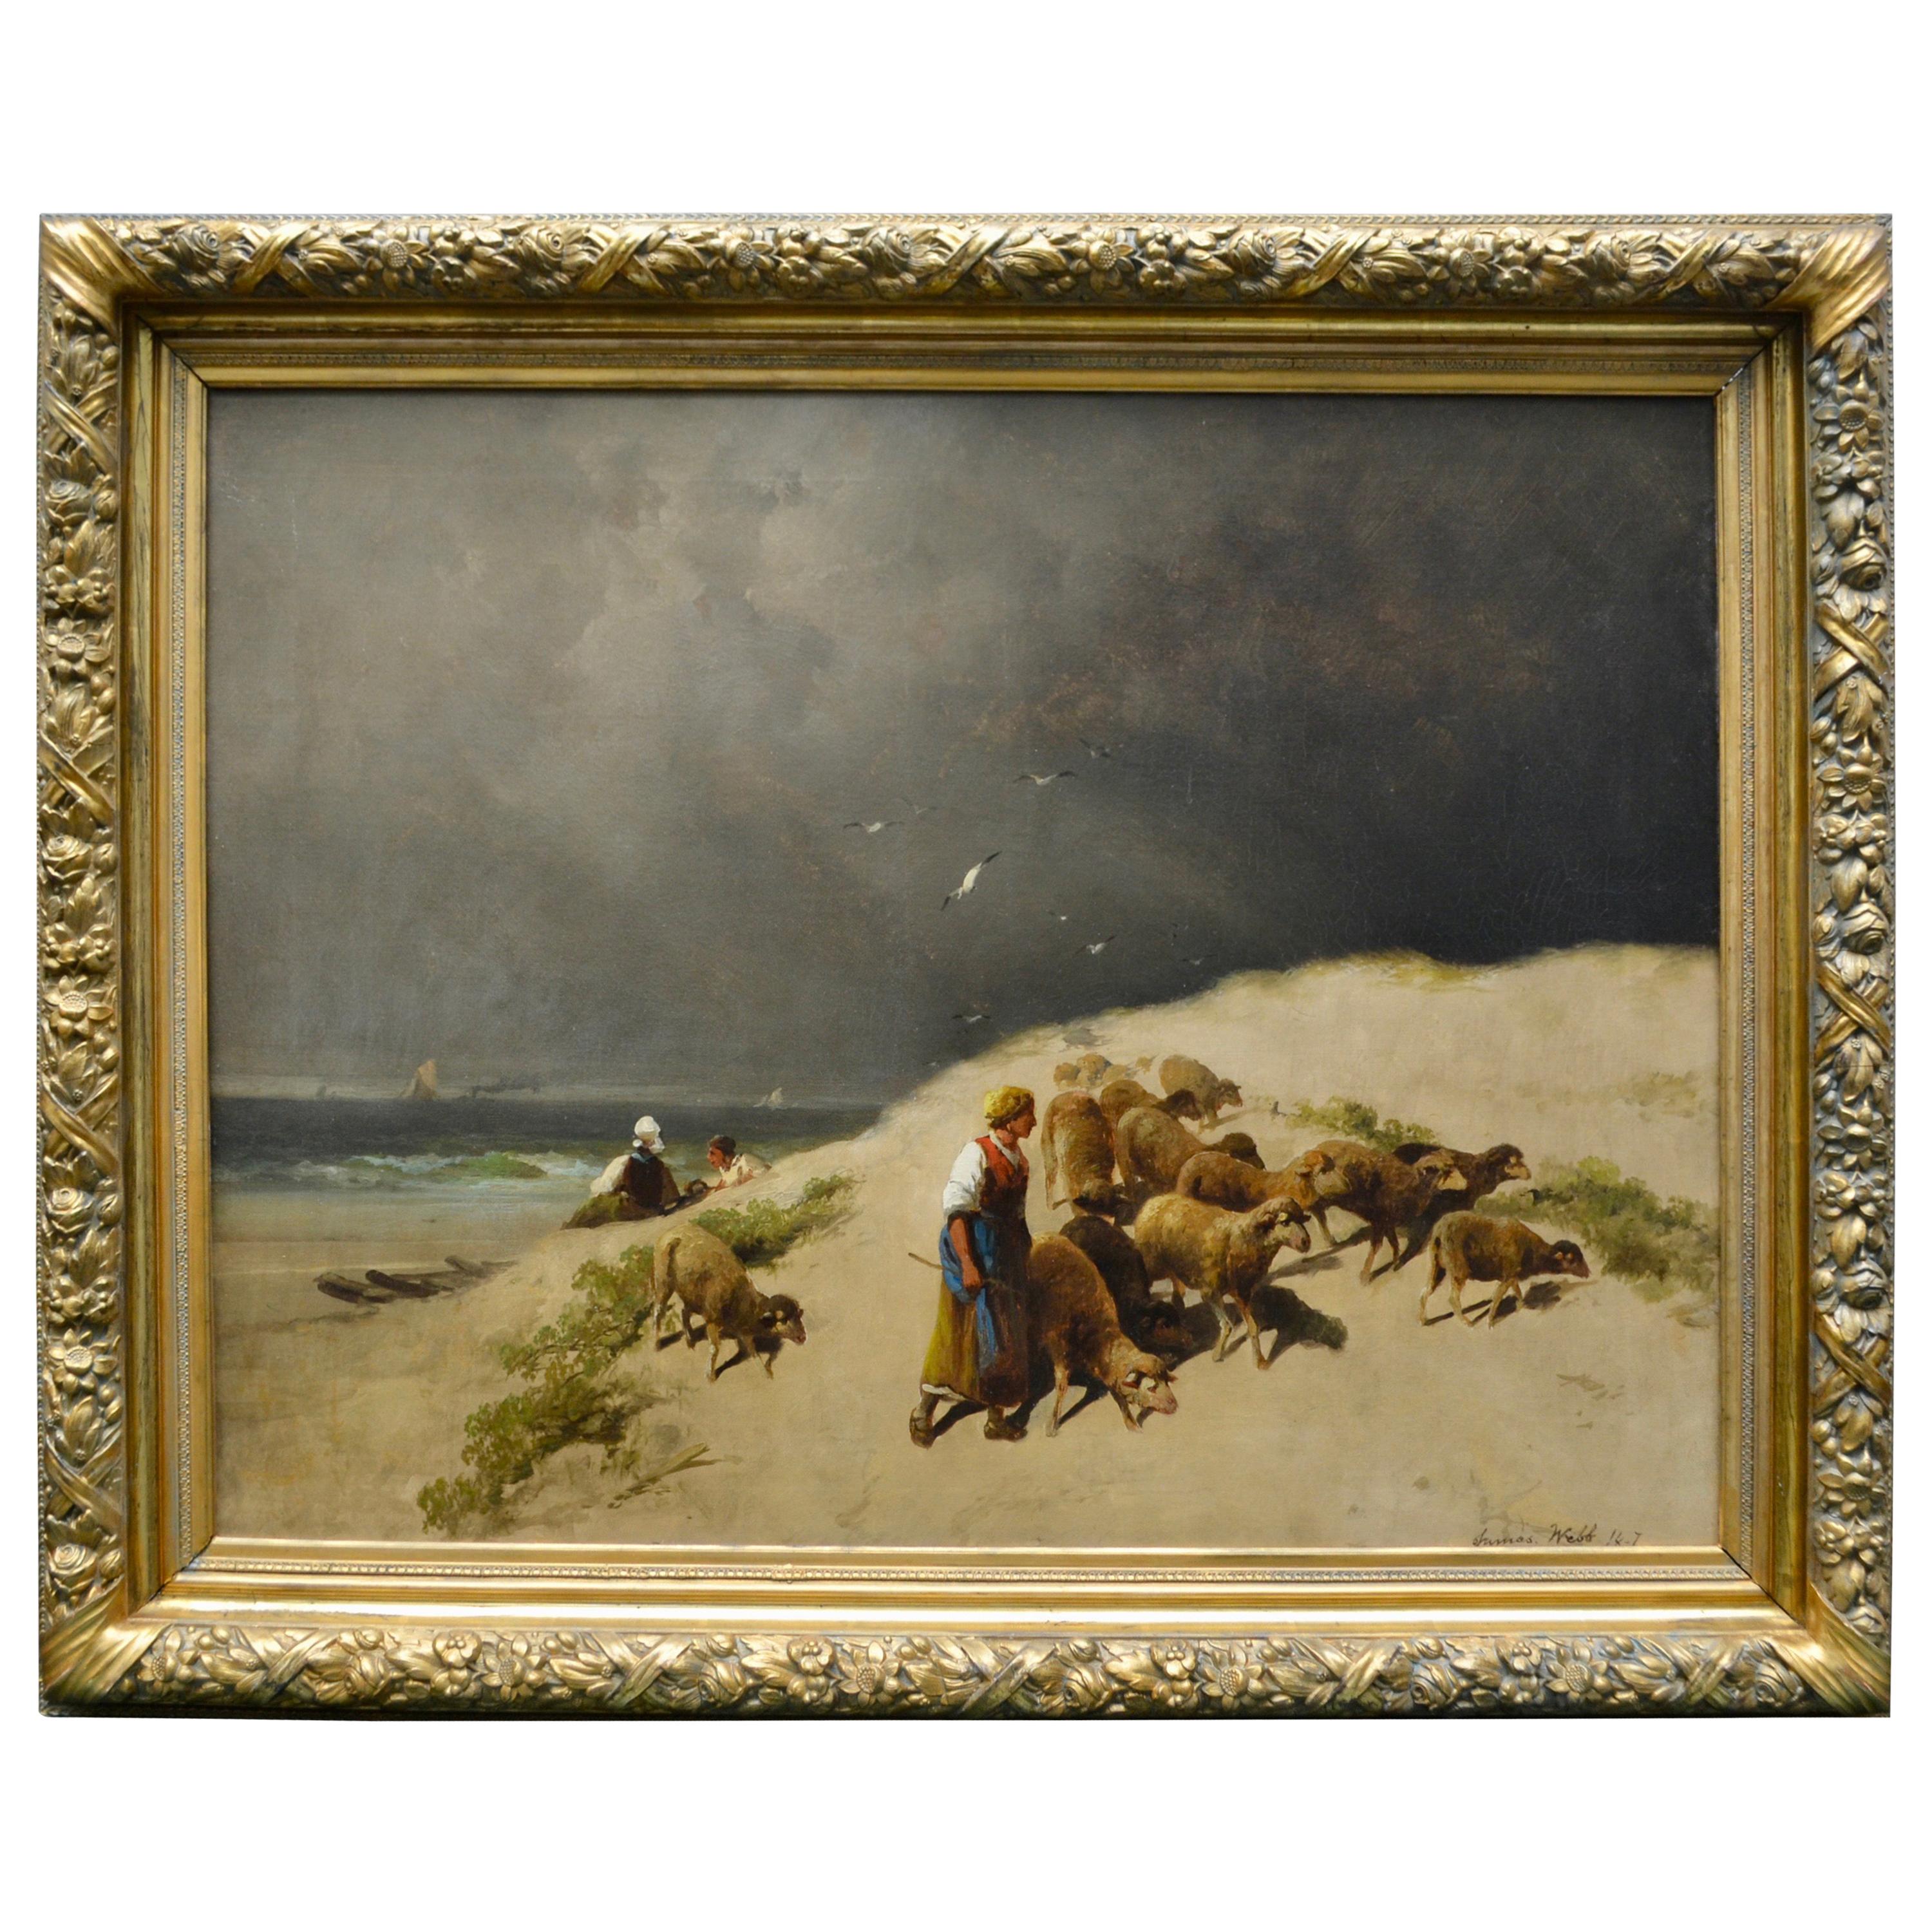 Original Oil Painting by the English Artist James R. Webb